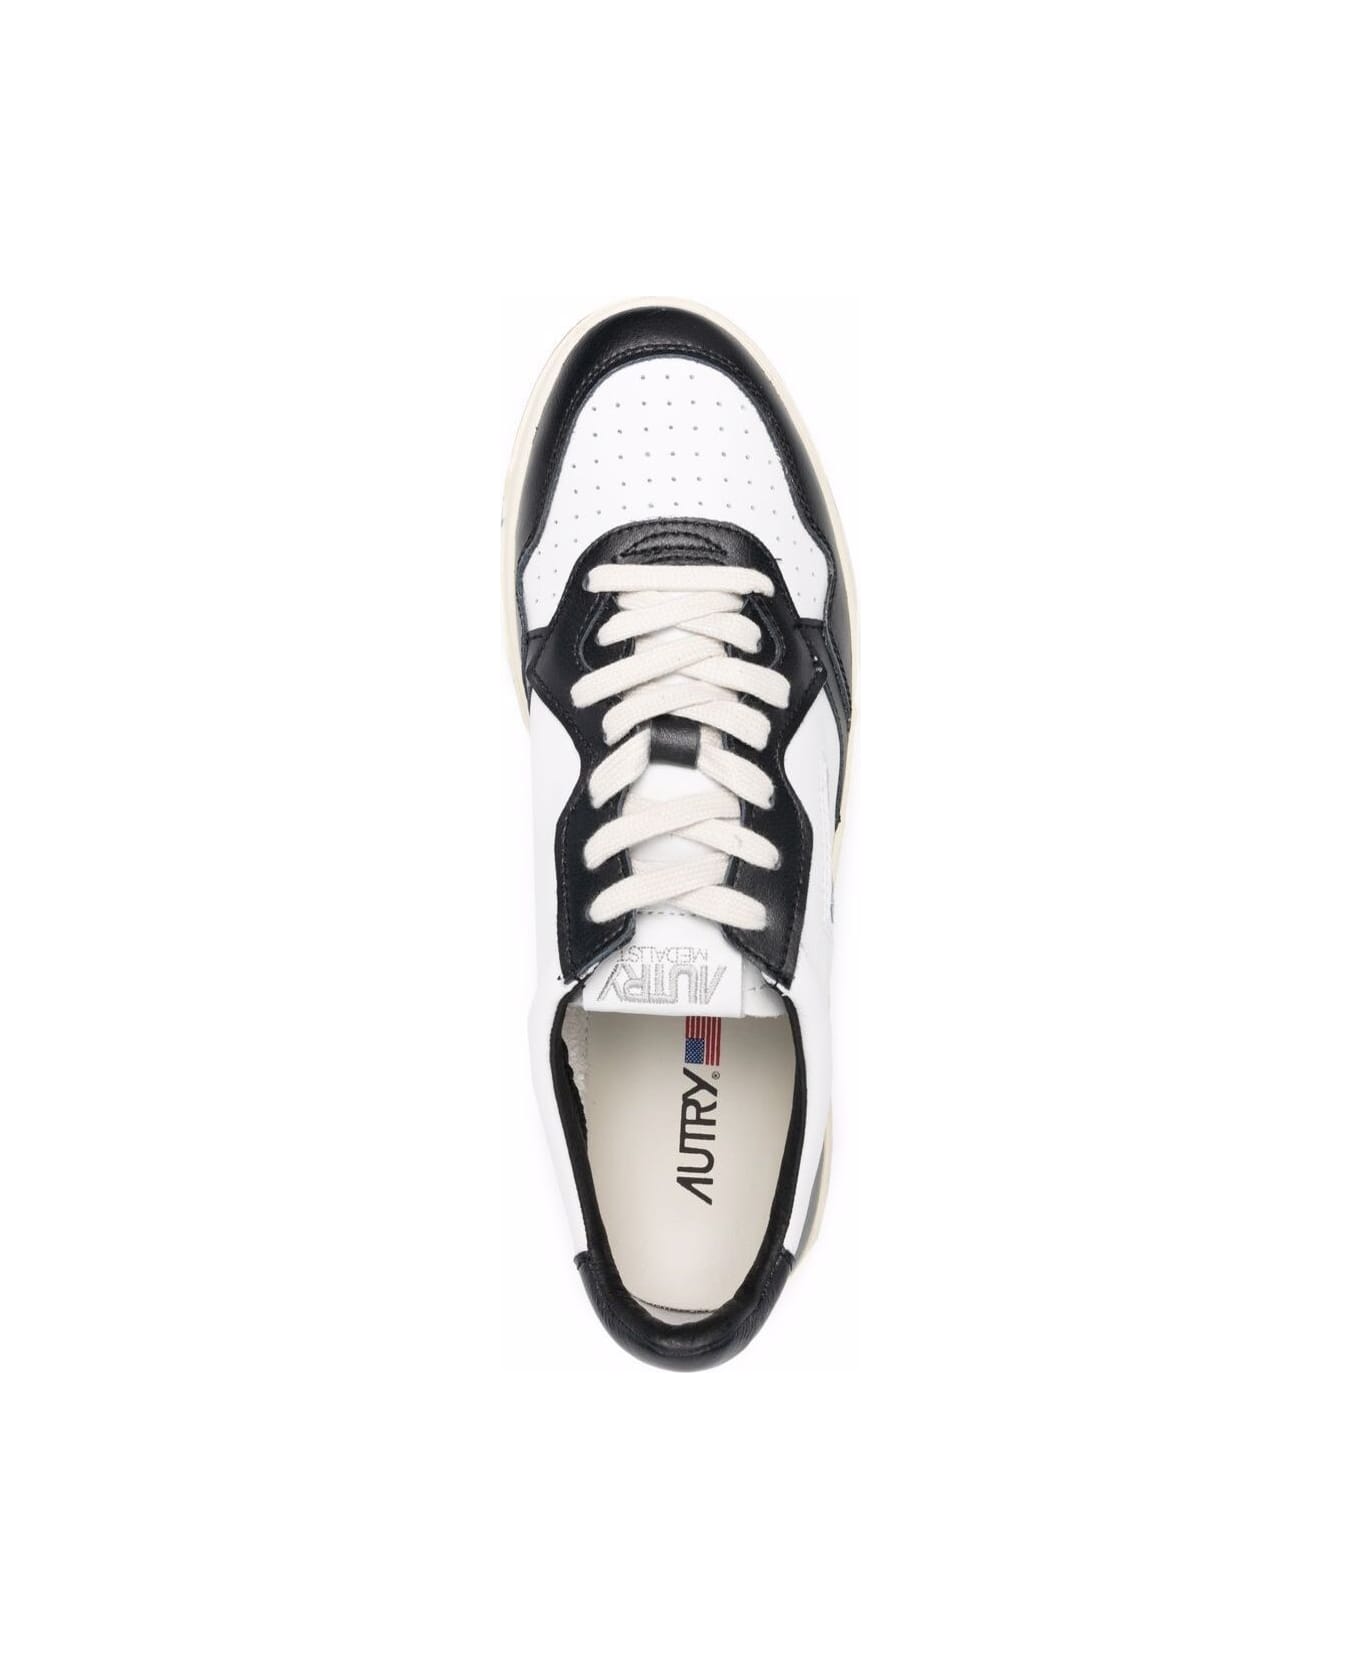 Autry White And Black Leather Sneakers